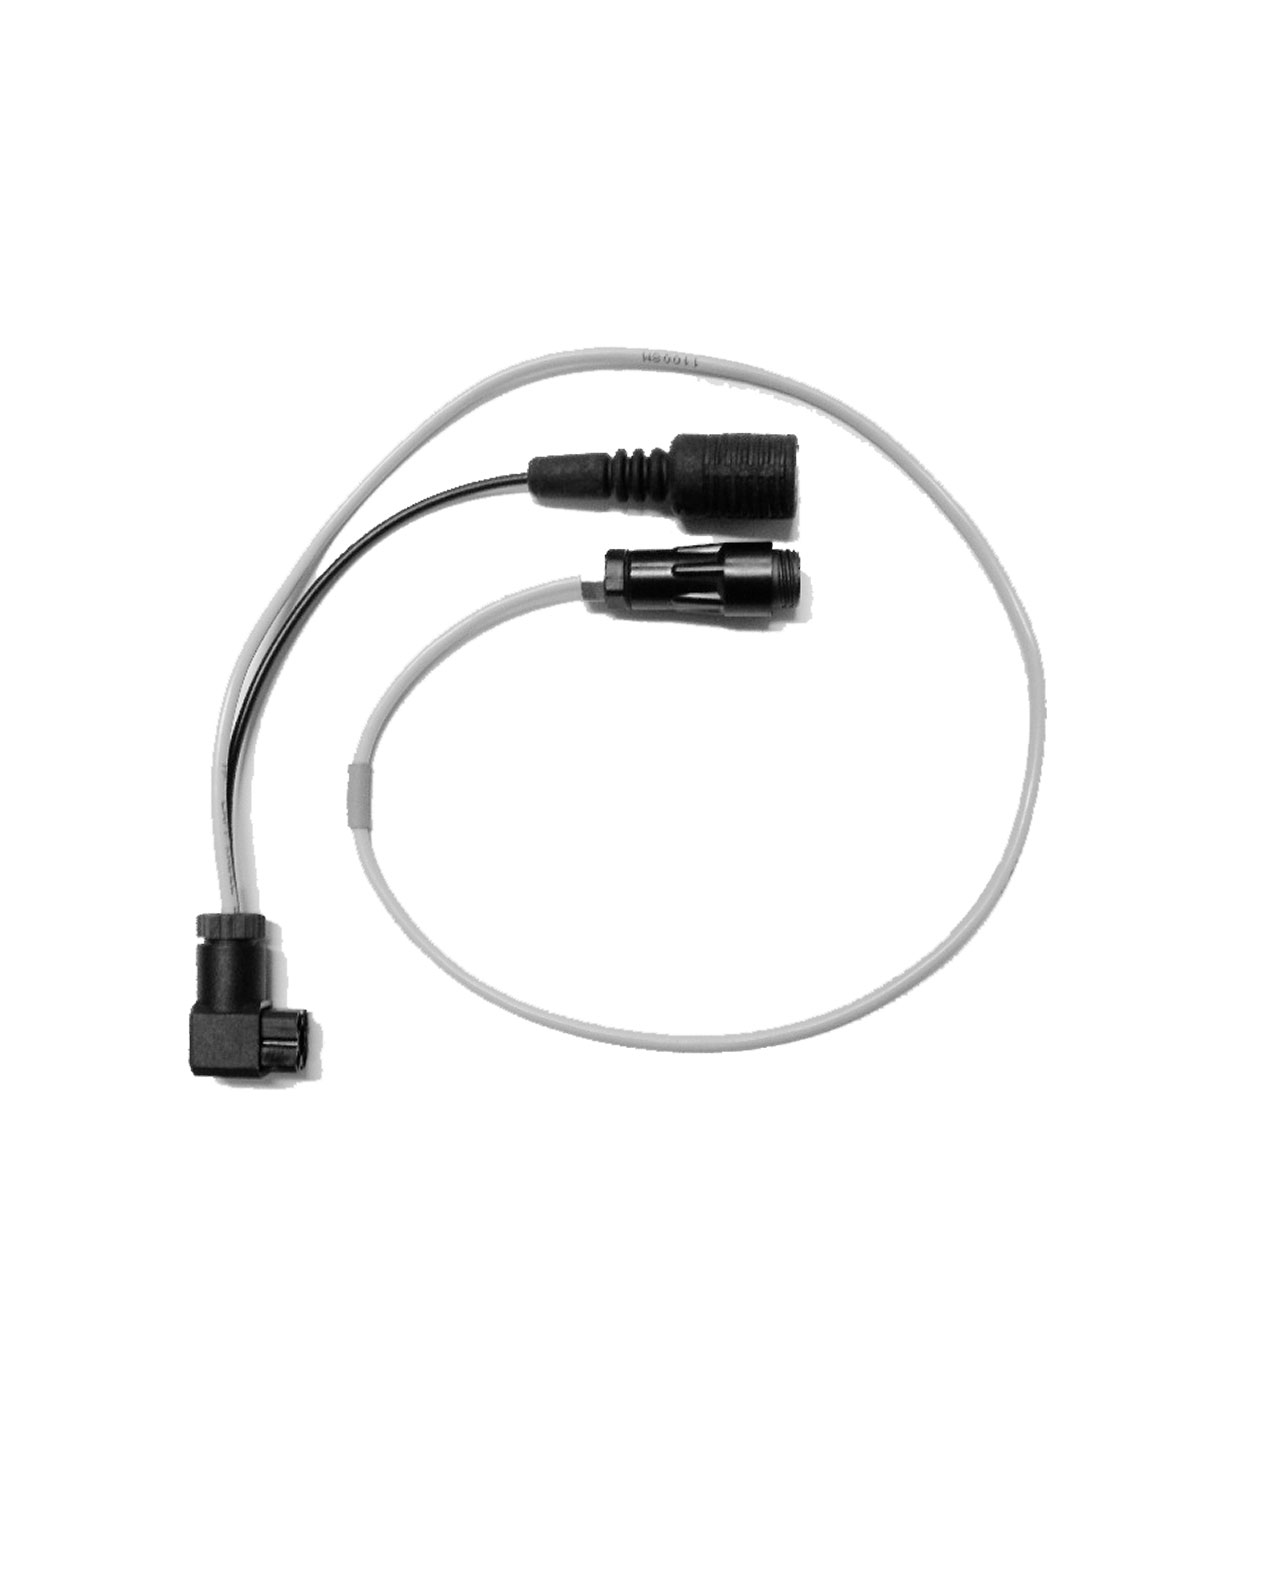 Cable for Amperometric Sensors - 0.7 m for DLXB